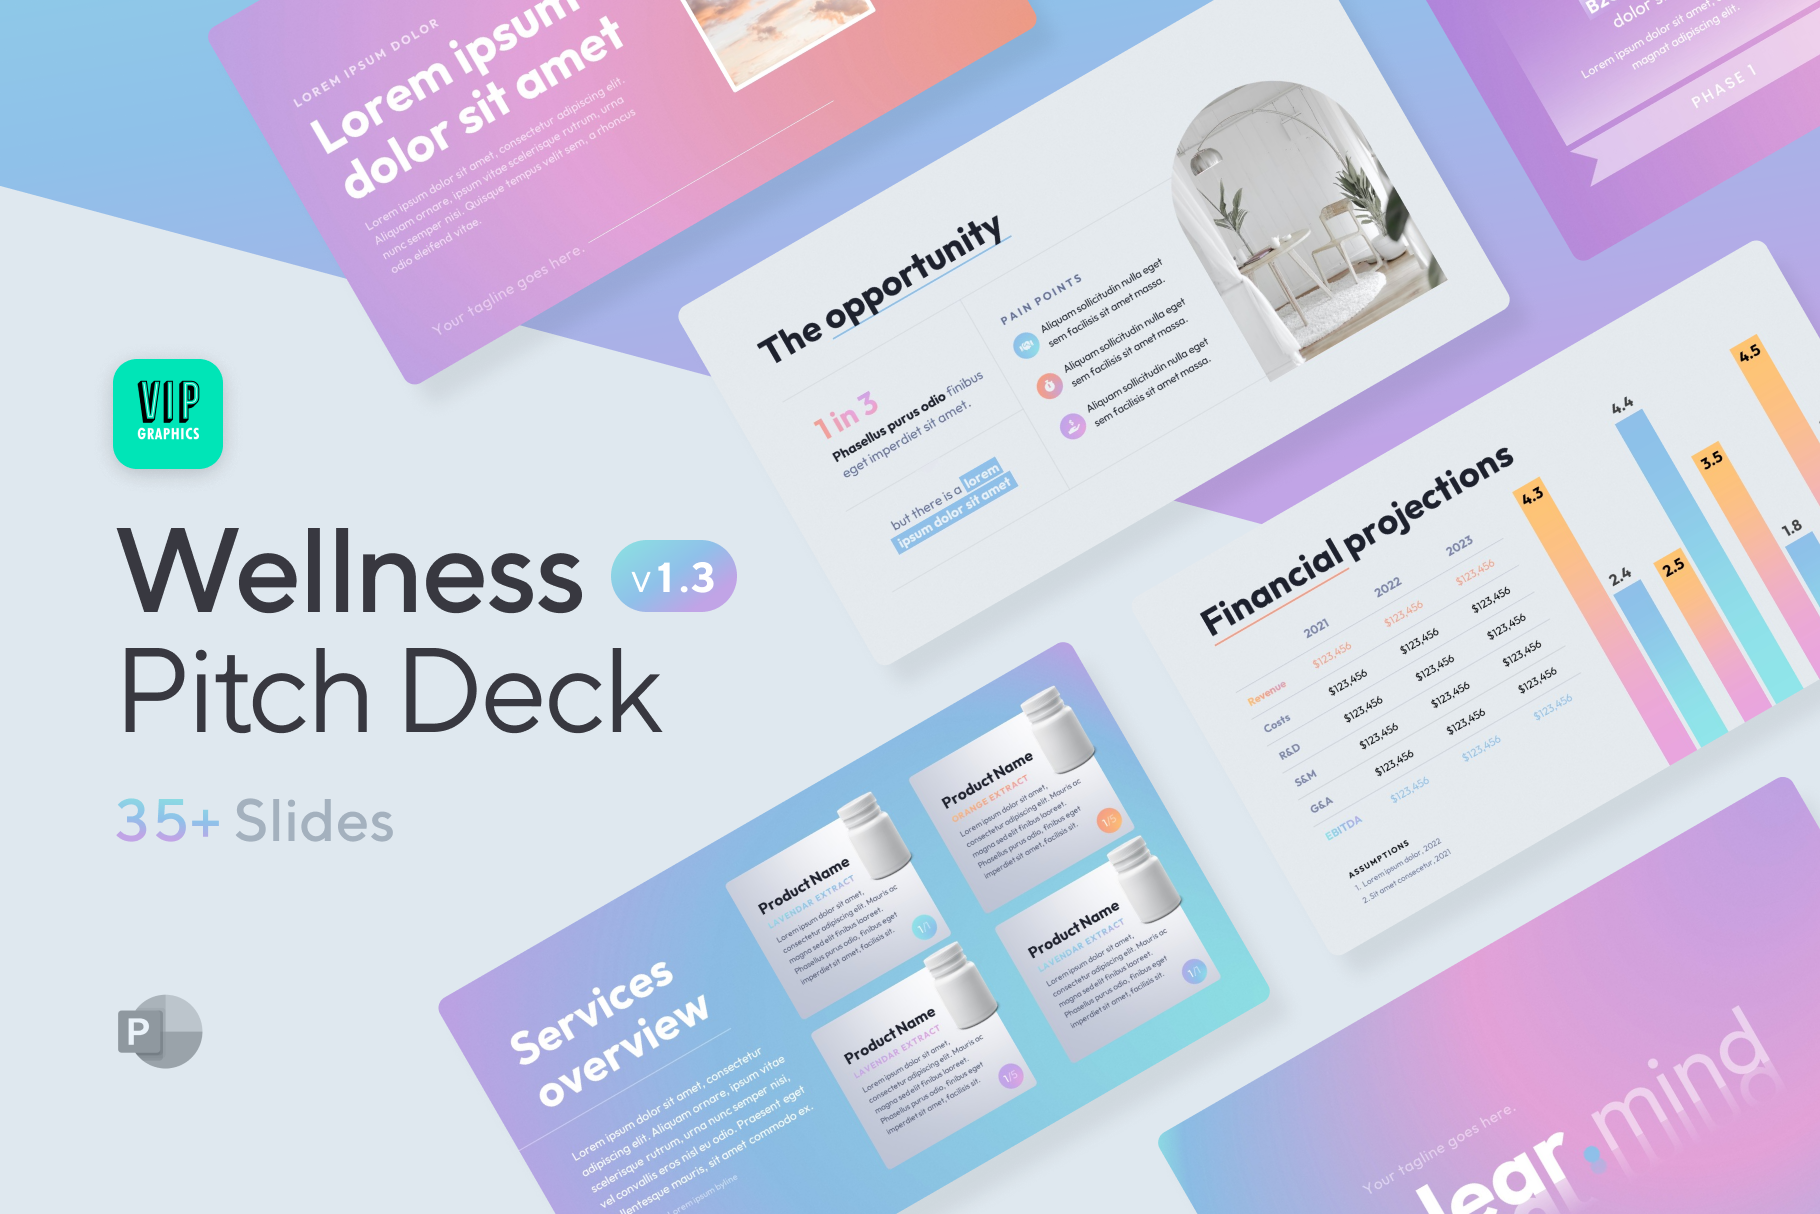 Wellness Pitch Deck - PowerPoint Template for Health & Wellbeing Startups: close investors, retail partnerships and more | VIP.graphics